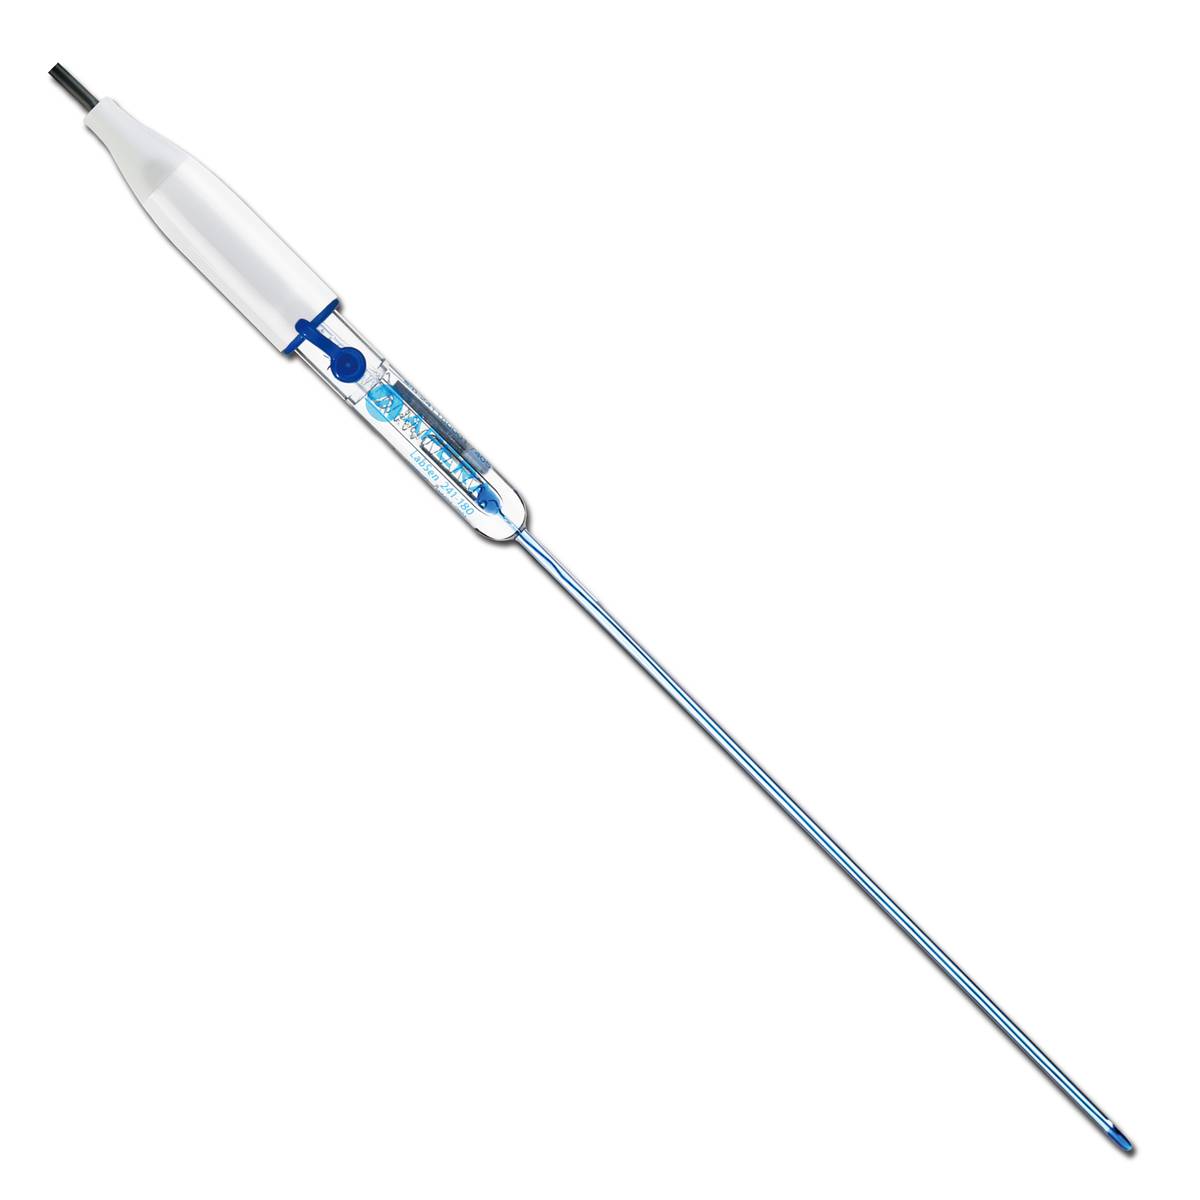 Picture of Apera Instruments LabSen 241-180 3 mm Dia. x 180 mm Glass Body pH Electrode with 3 ft. Cable for NMR Tubes